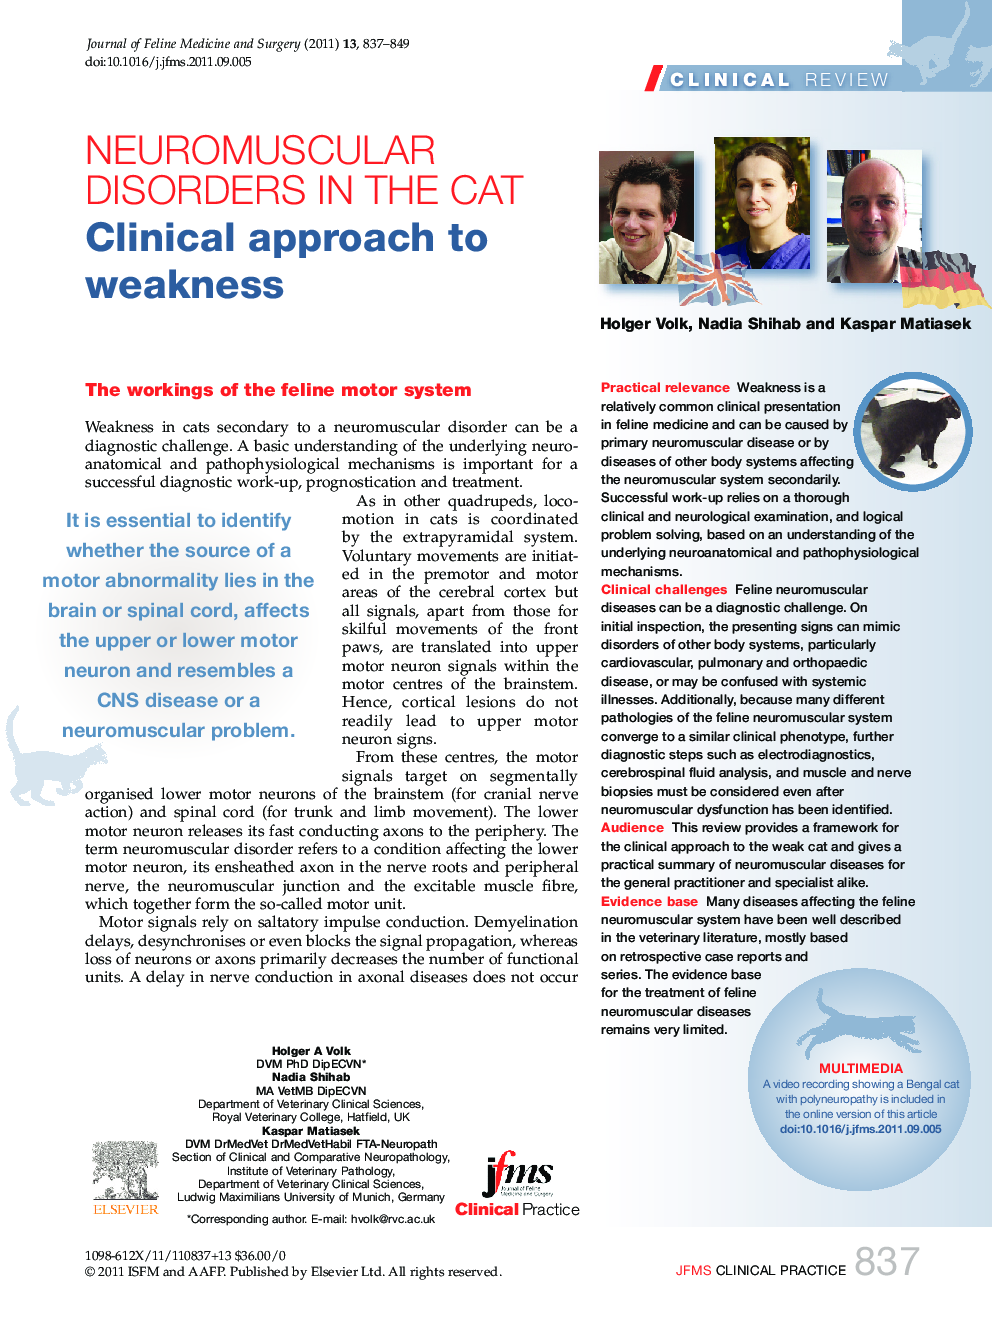 Neuromuscular disorders in the cat: Clinical approach to weakness